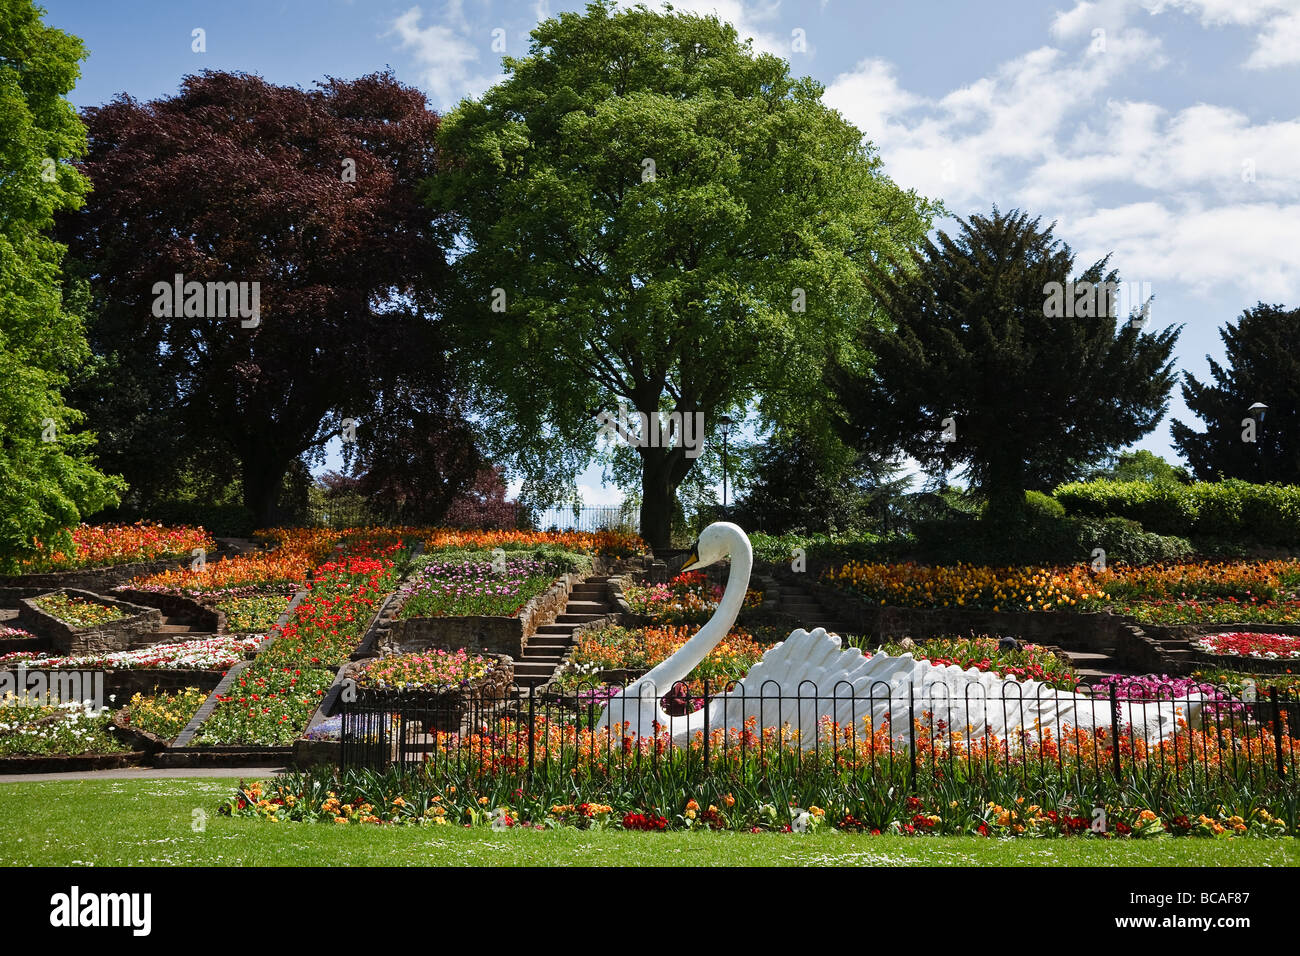 Floral display and the famous swan in Stapenhill Gardens, Burton upon Trent, Staffordshire Stock Photo